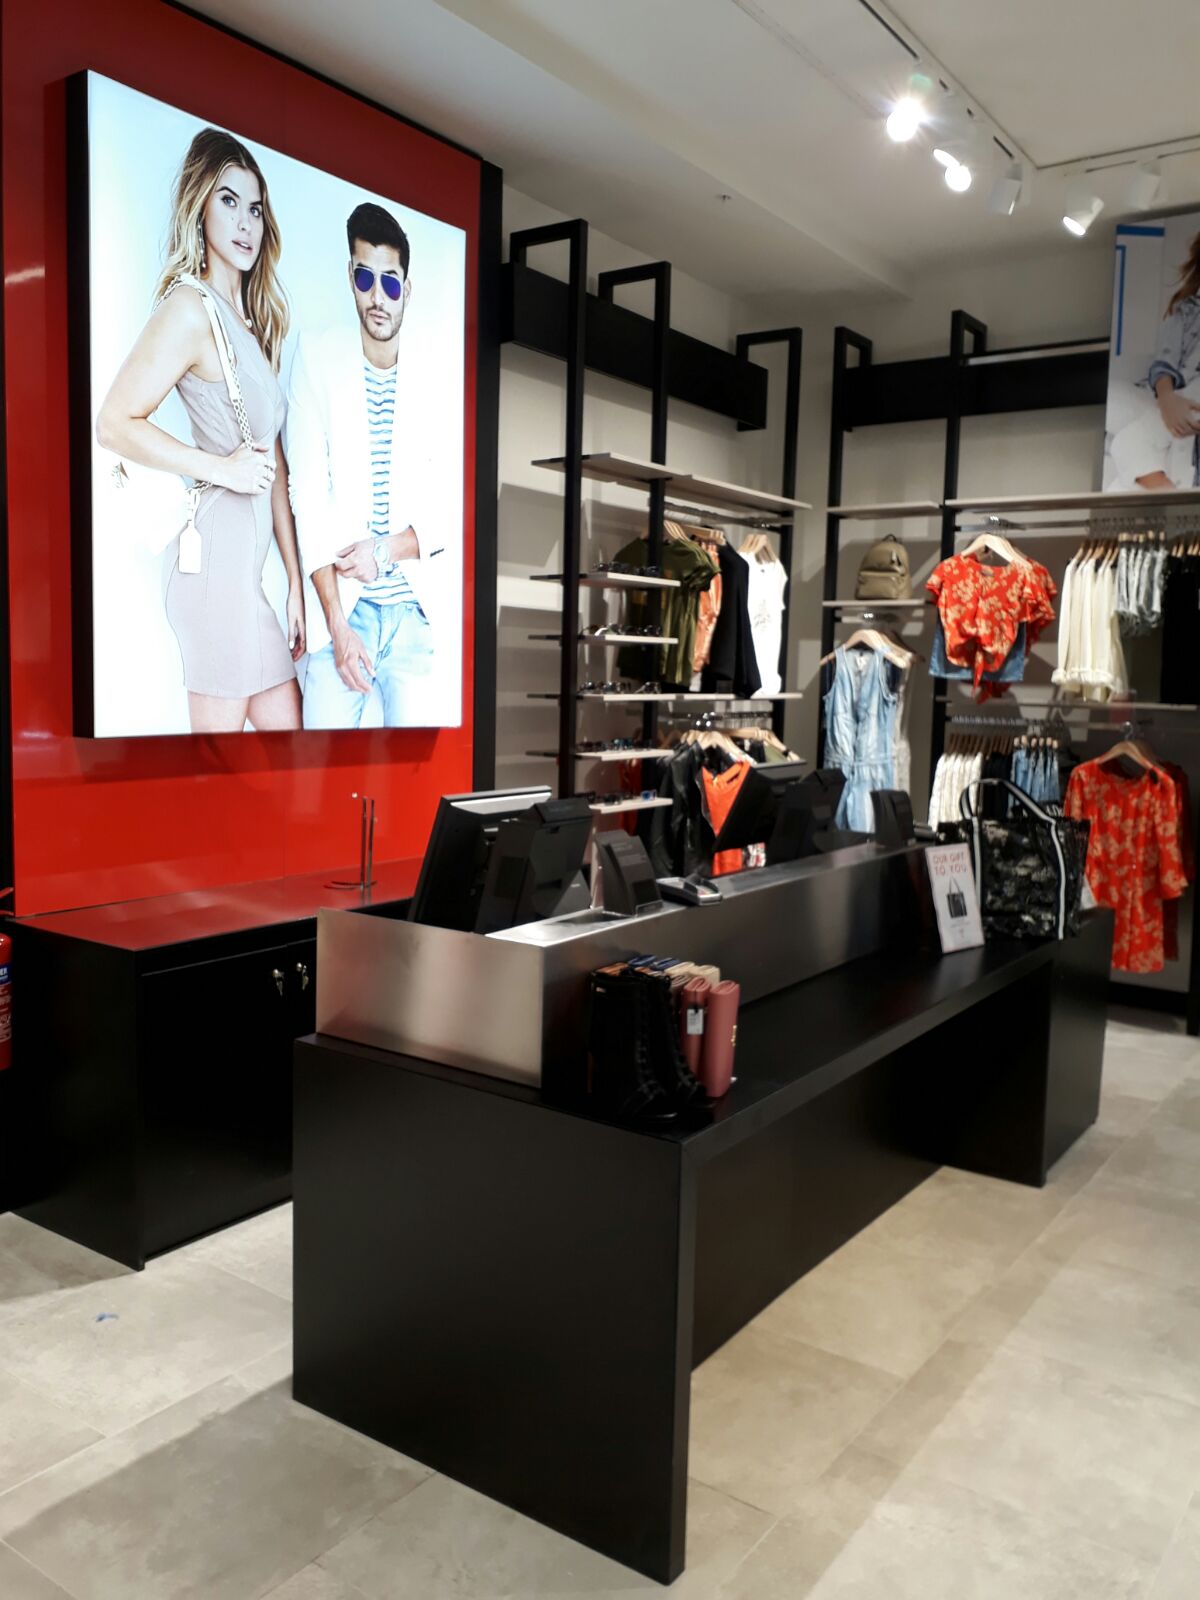 klon sagtmodighed overdraw Omnide on Twitter: "New #Guess shop's opening today at the #mcarthurglen  designer outlet in #york https://t.co/9aJXlWQYJr" / Twitter